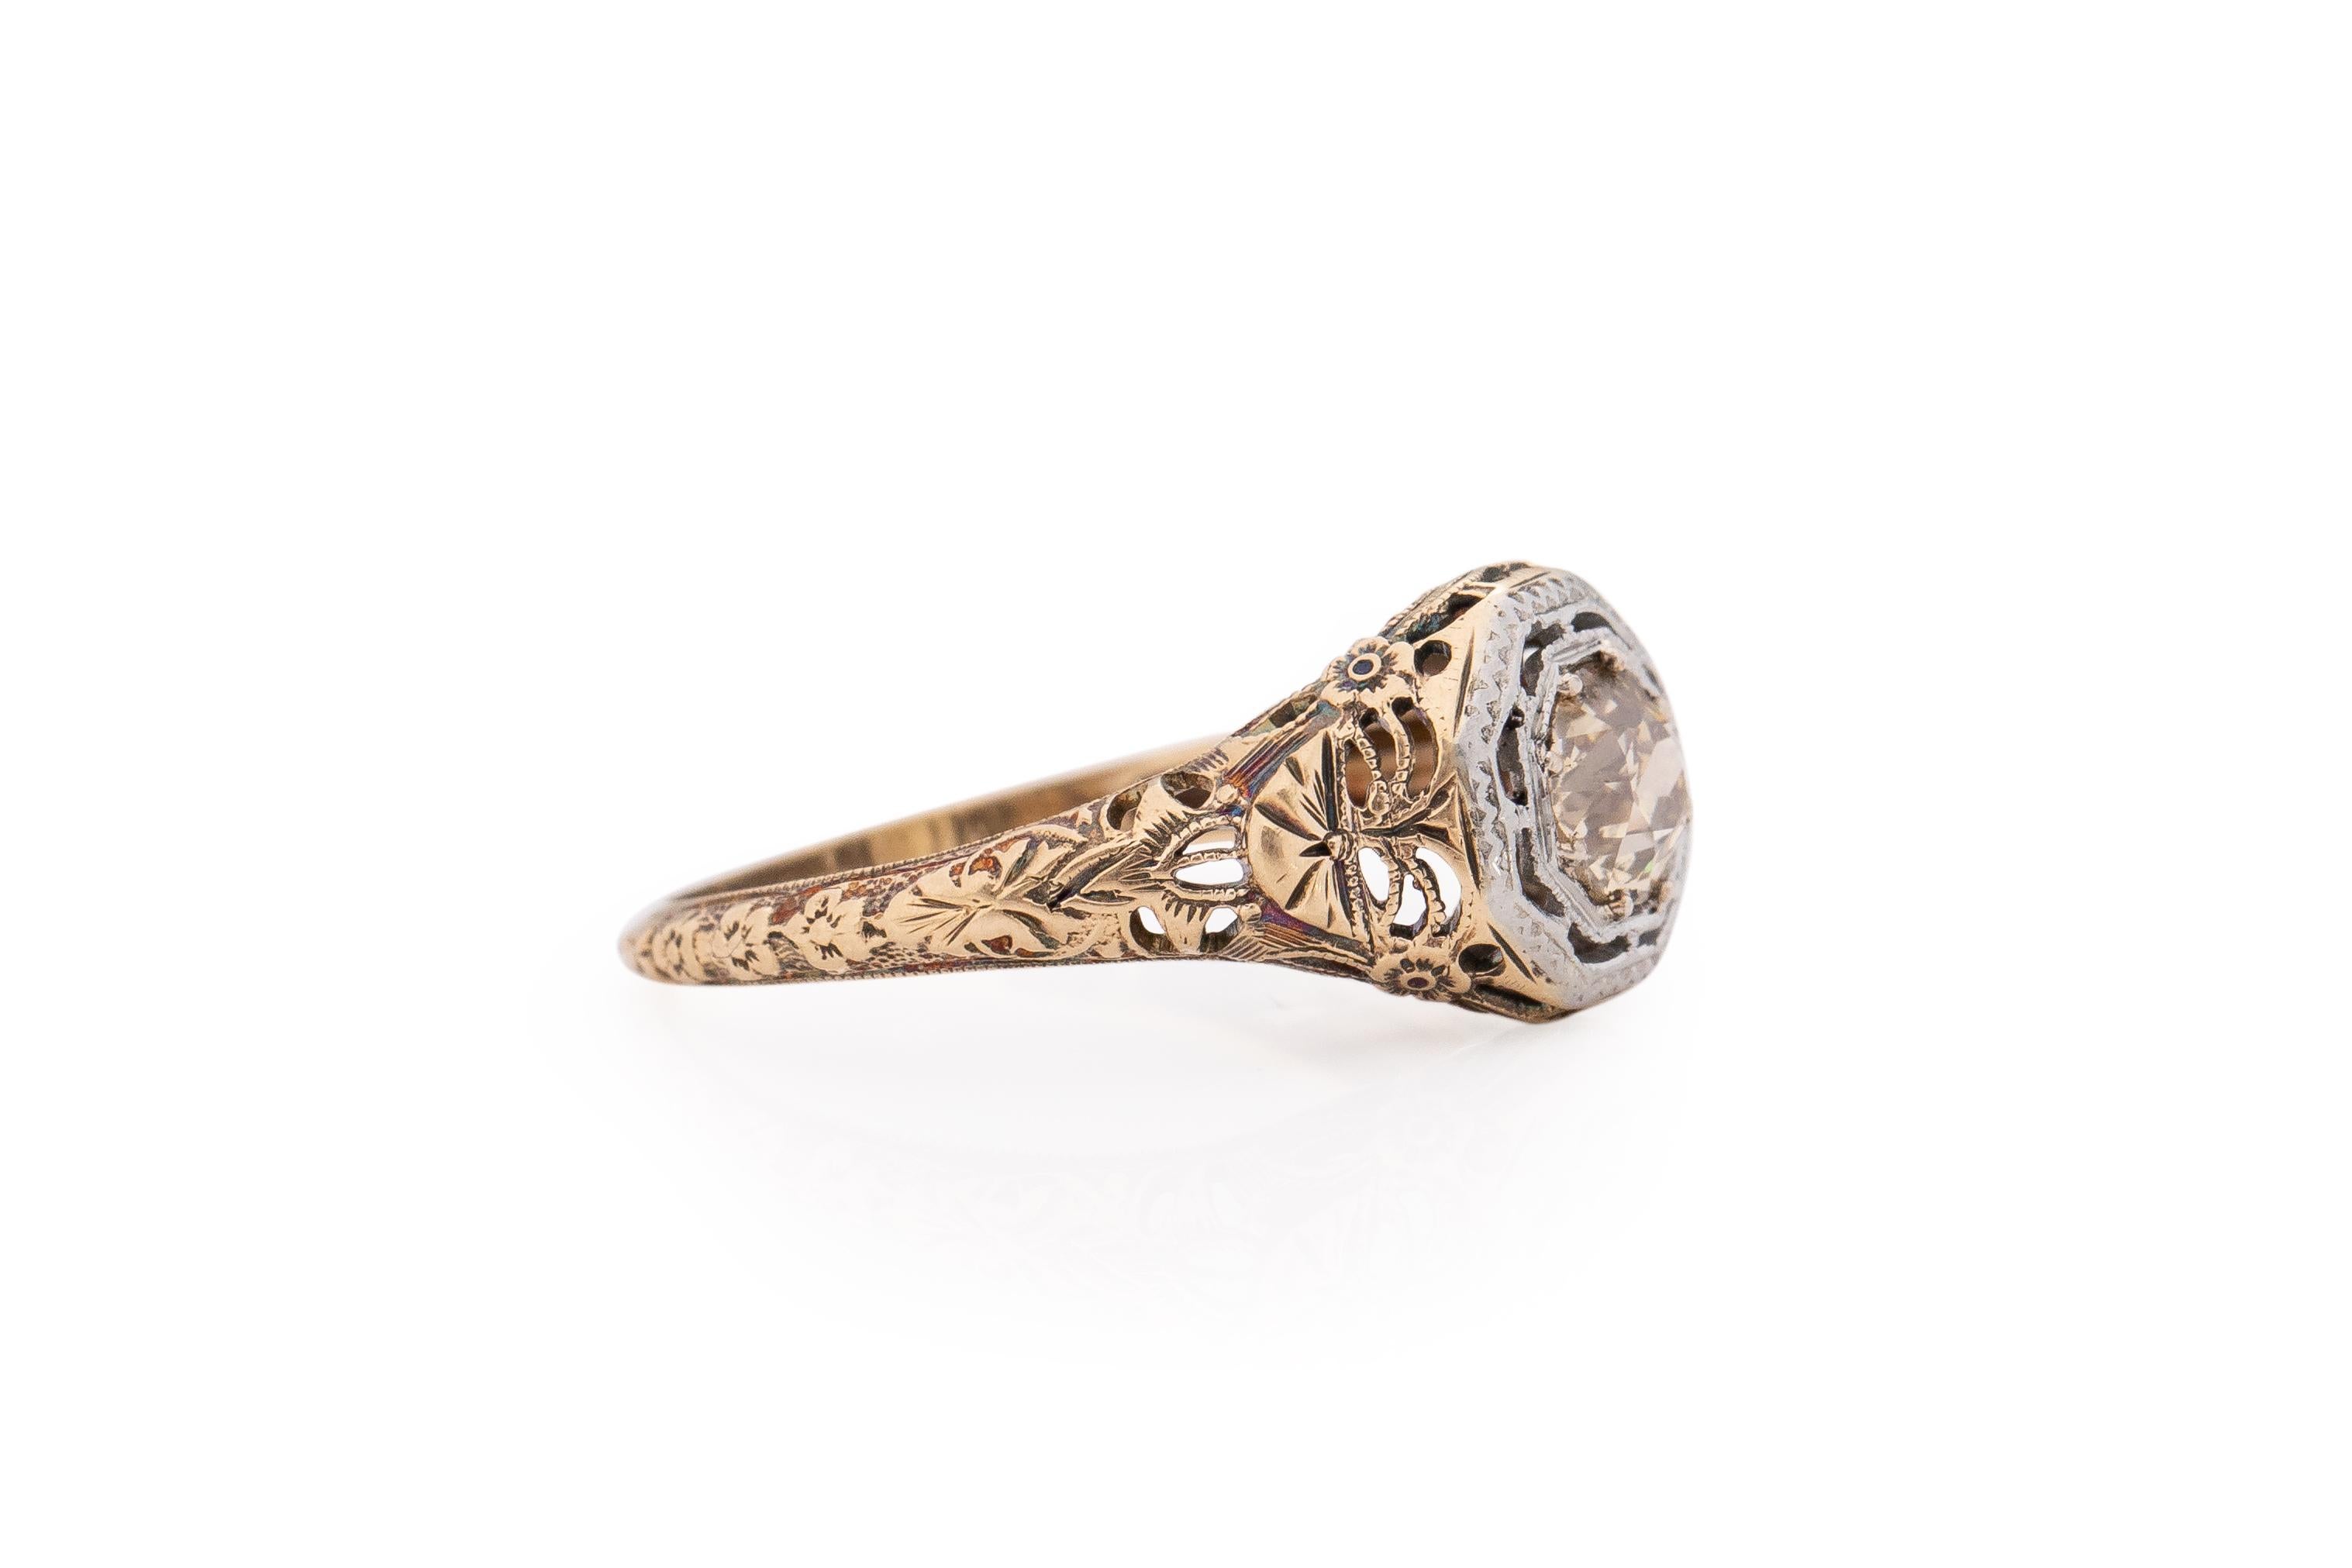 Ring Size: 6.5
Metal Type: 14 karat Yellow Gold [Hallmarked, and Tested]
Weight: 2.0 grams

Center Diamond Details:
Weight: .55 carat
Cut: Old European brilliant
Color: Fancy Brown, Natural Color
Clarity: VS

Finger to Top of Stone Measurement: